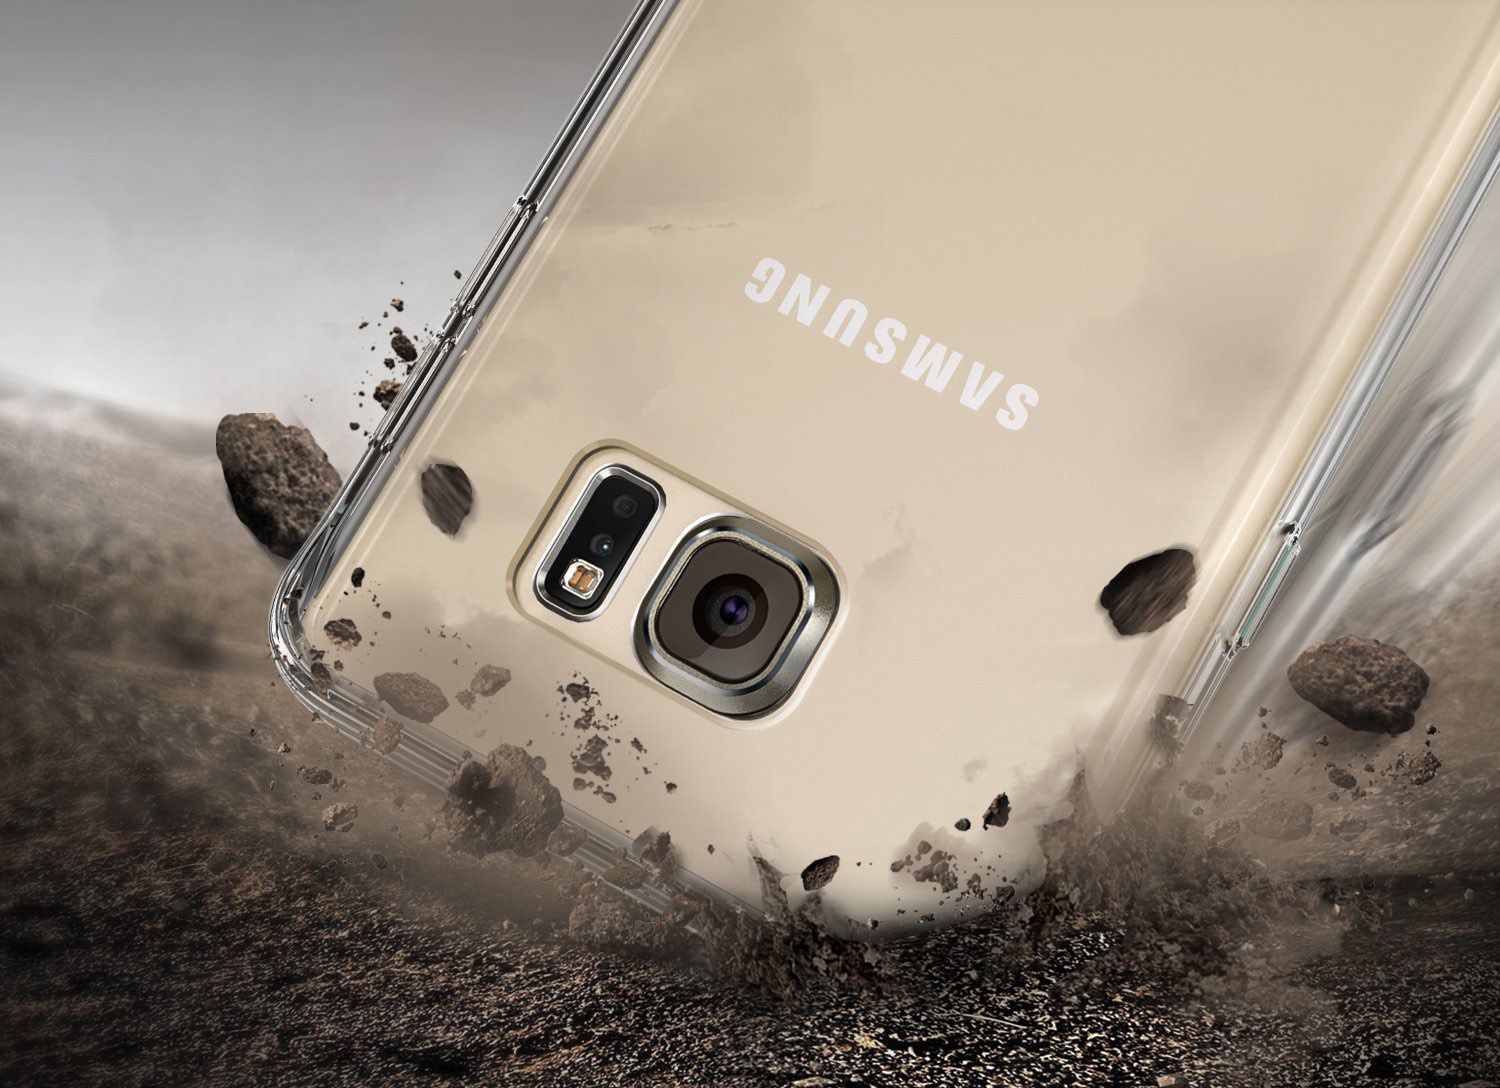 samsung galaxy note 5 release date rumours and everything you need to know image 1